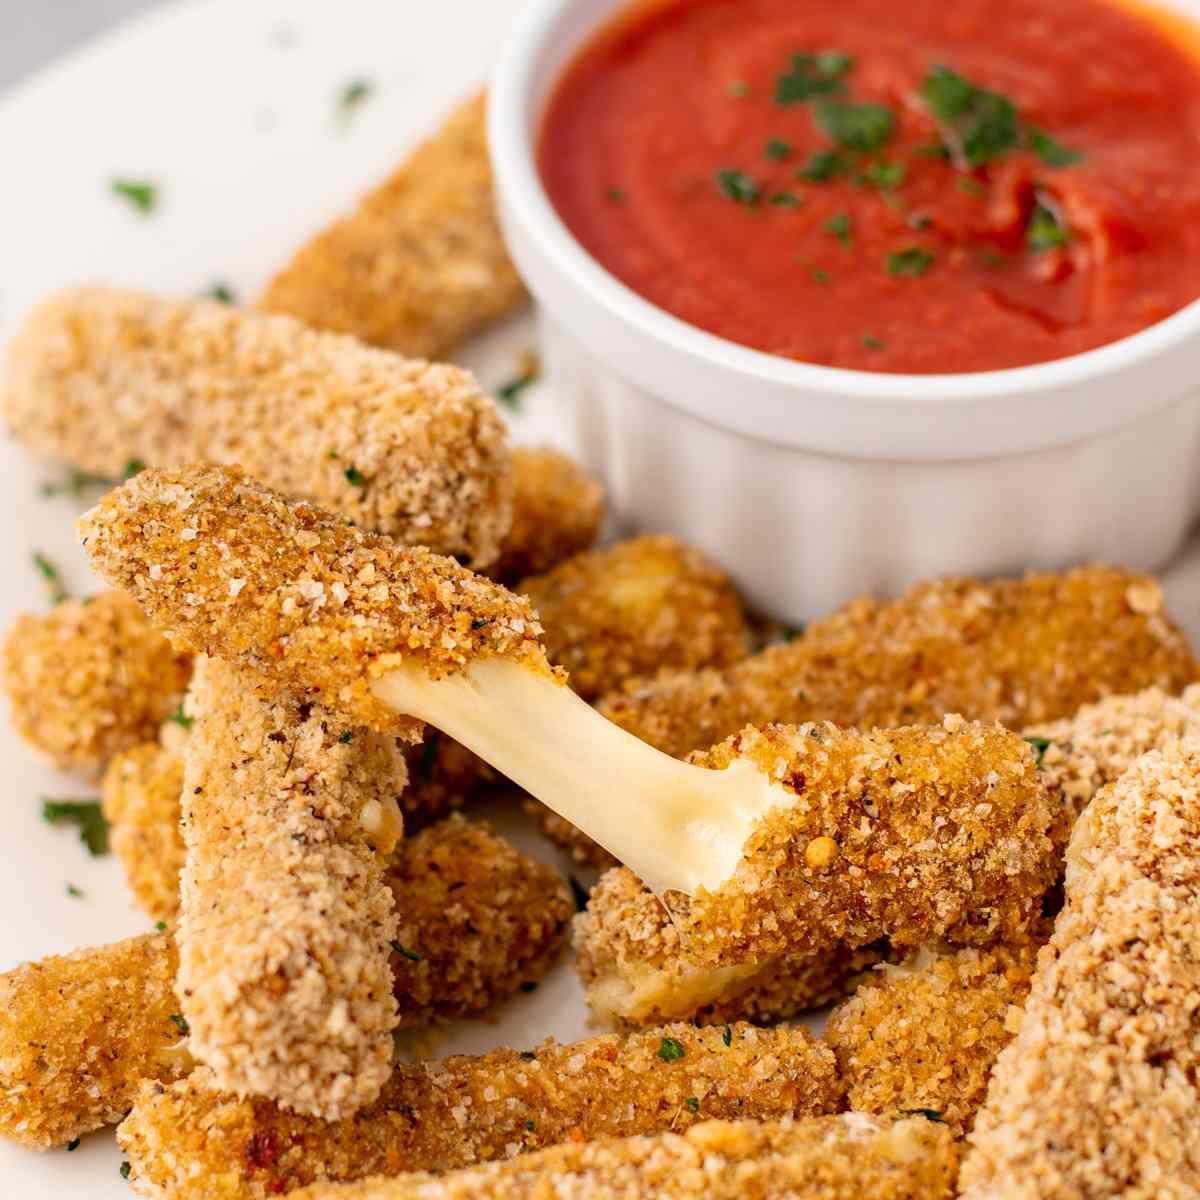 Mozzarella sticks on a white plate with red sauce on the side.